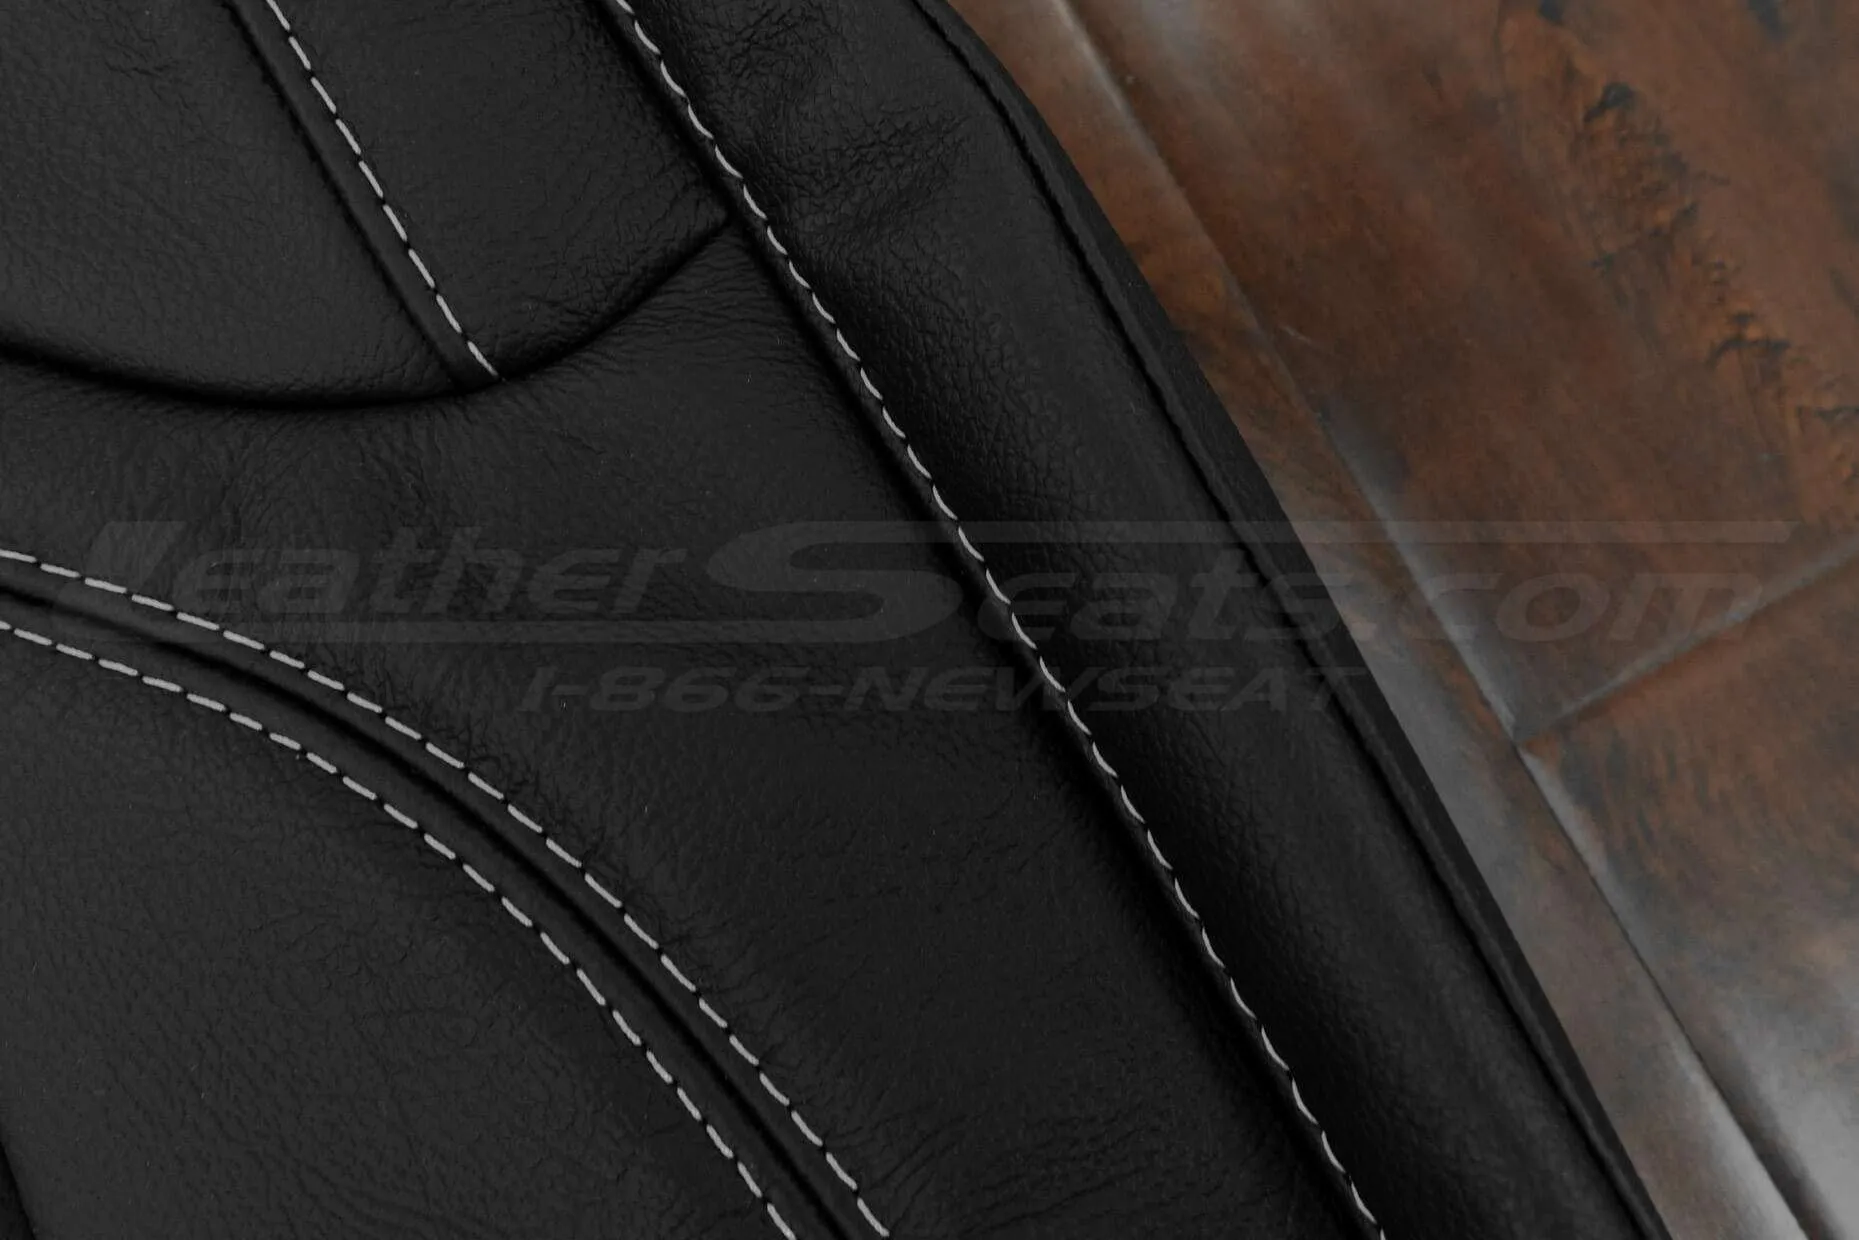 Contrasting Silver stitching on Black leather